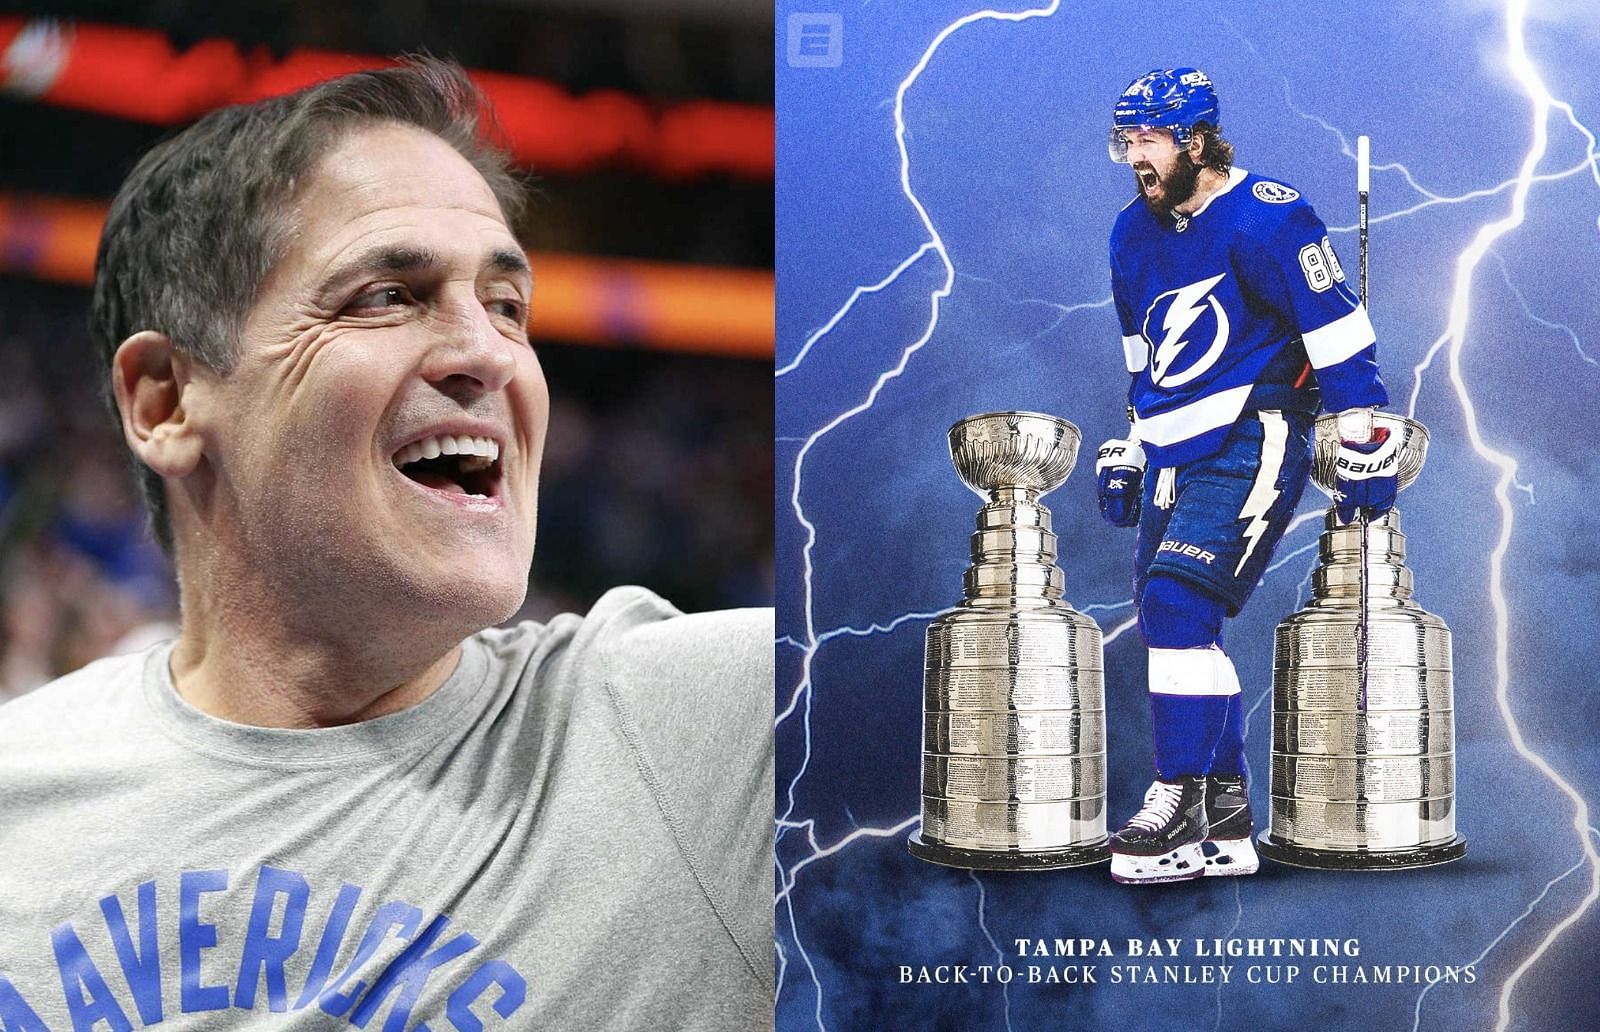 Mark Cuban reveals how he made money off of Tampa Bay Lightning winning back-to-back Stanley Cup championships